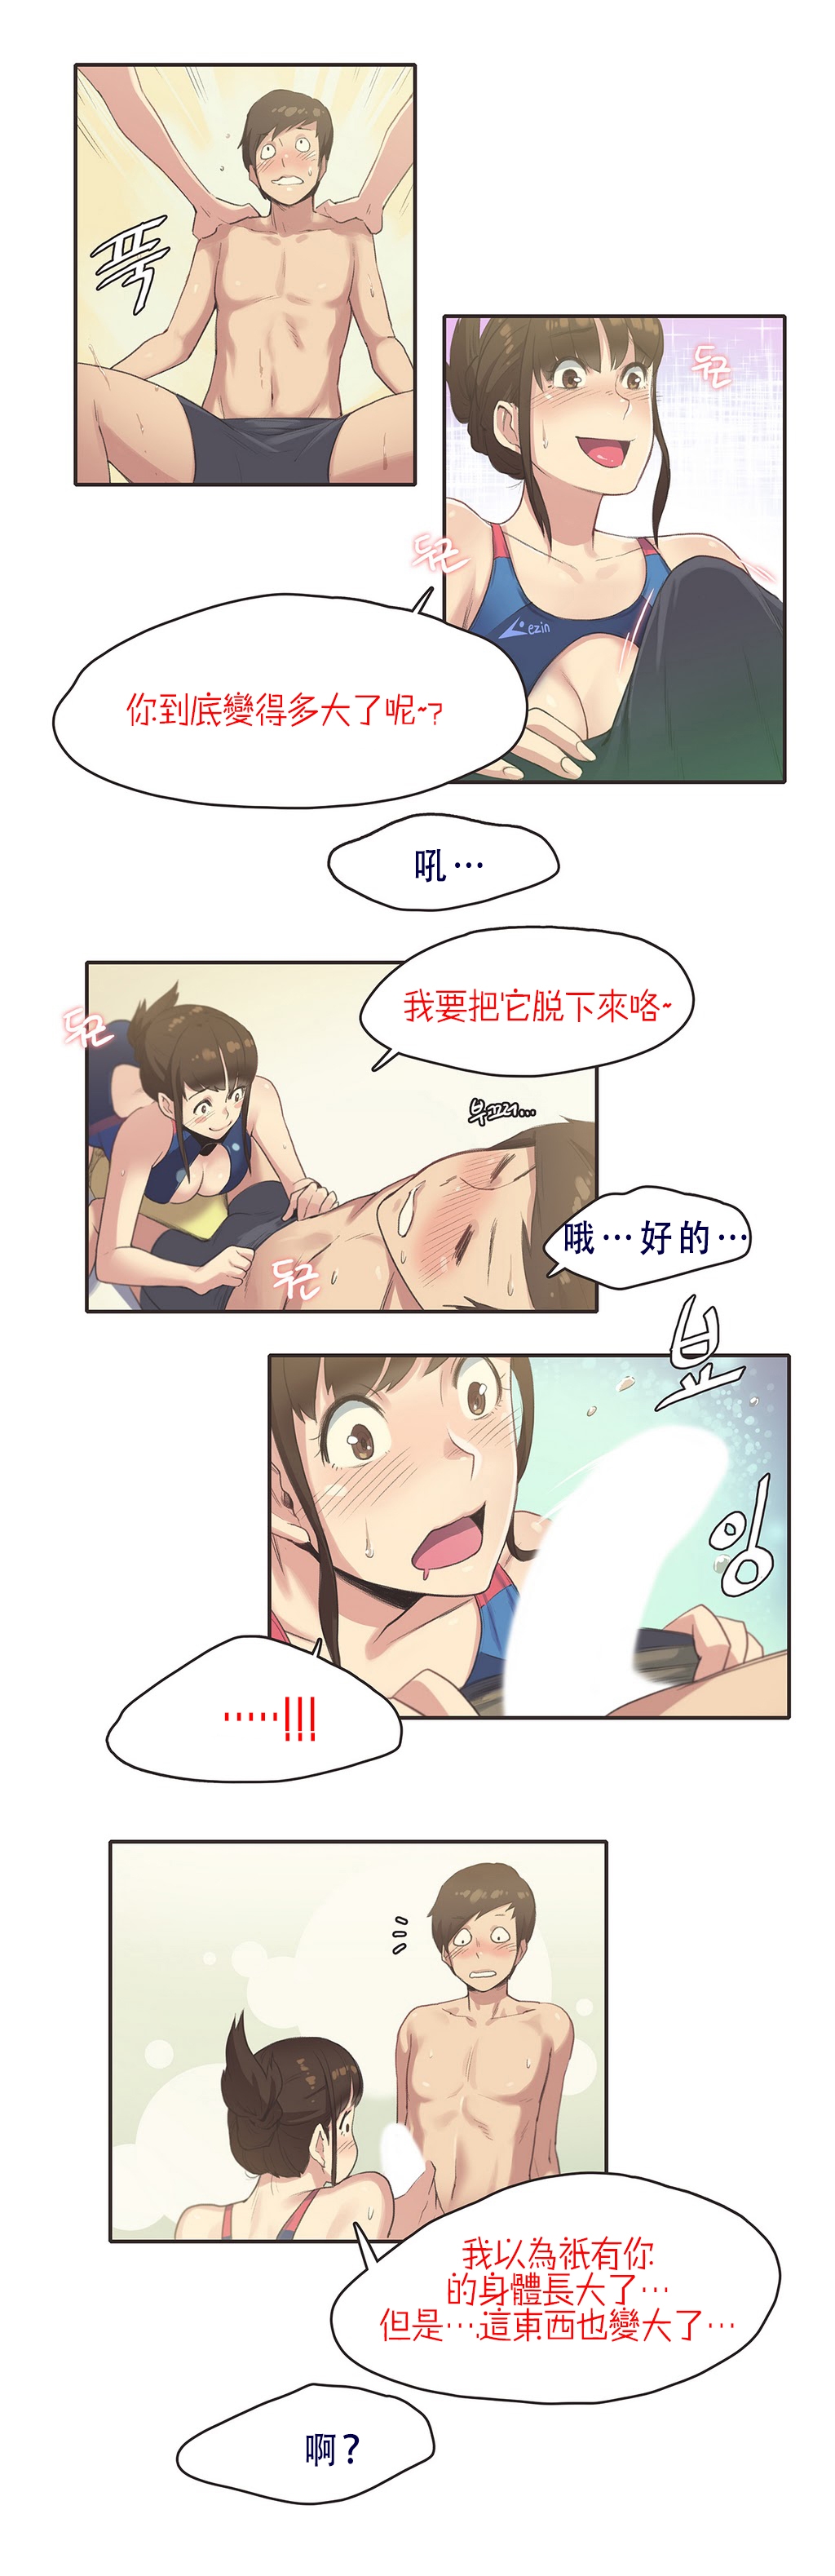 [Gamang] Sports Girl Ch.7 [Chinese] [高麗個人漢化] 9